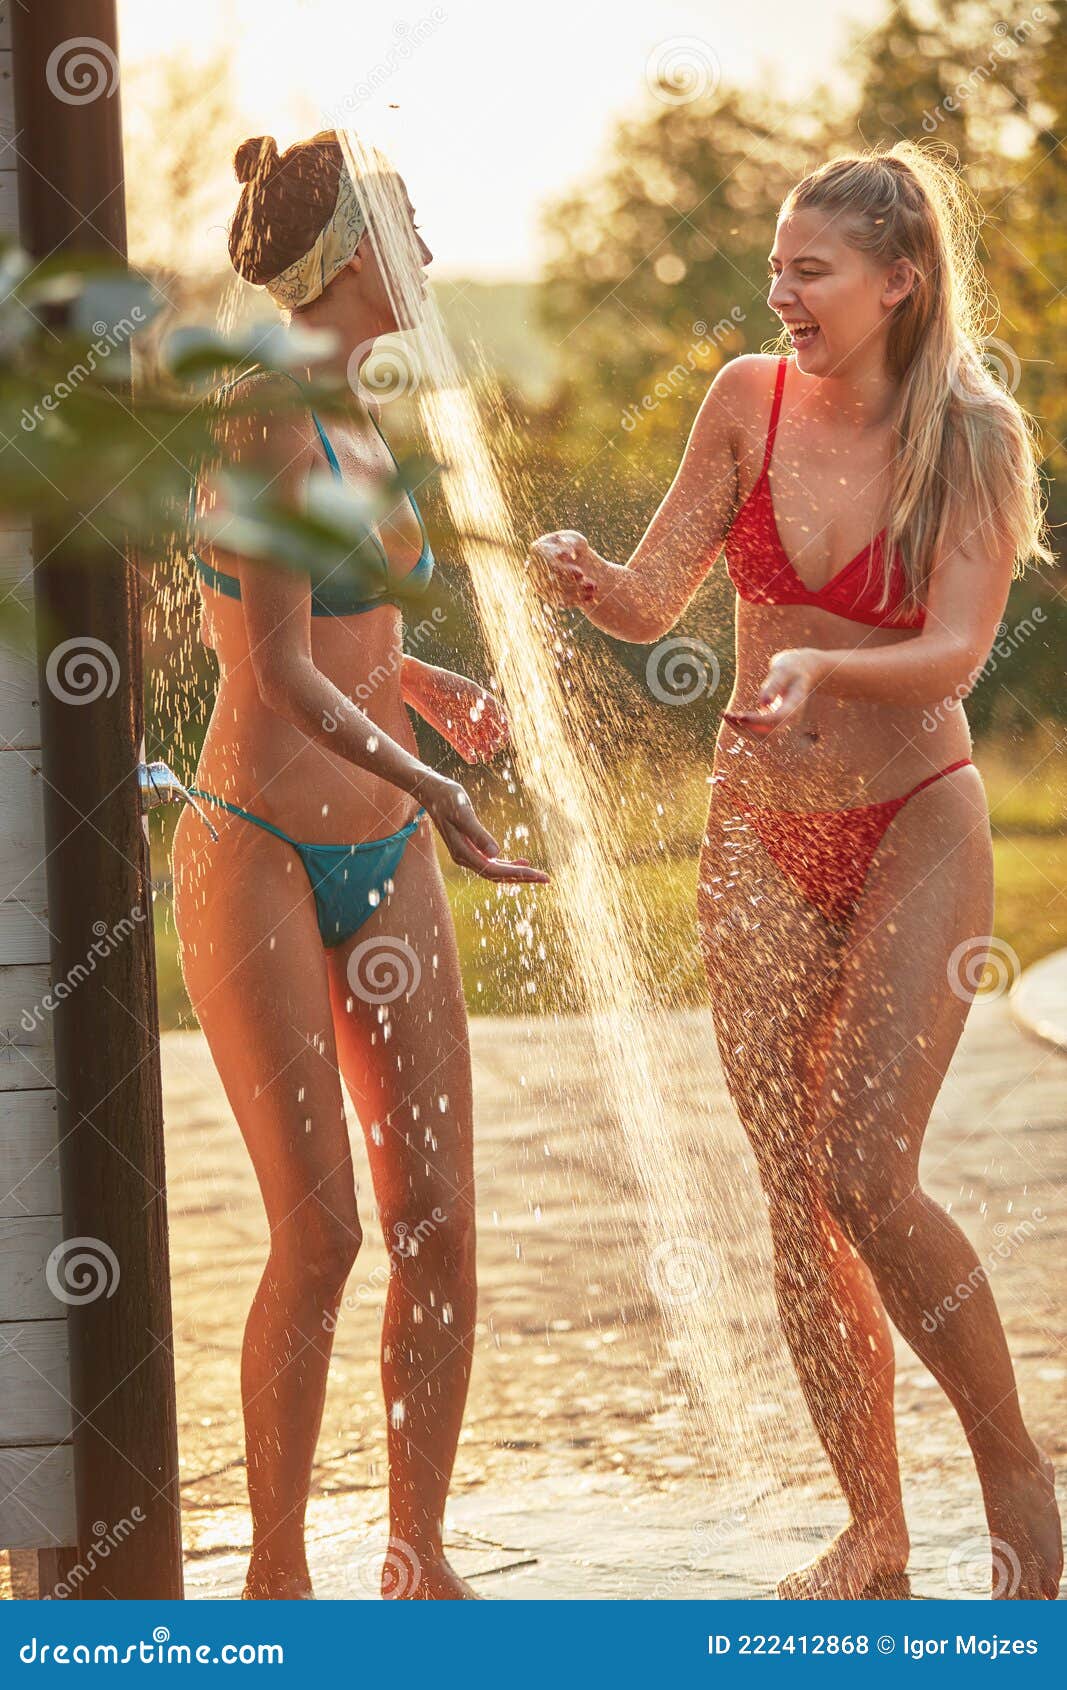 denise mireault add photo two girls showering together